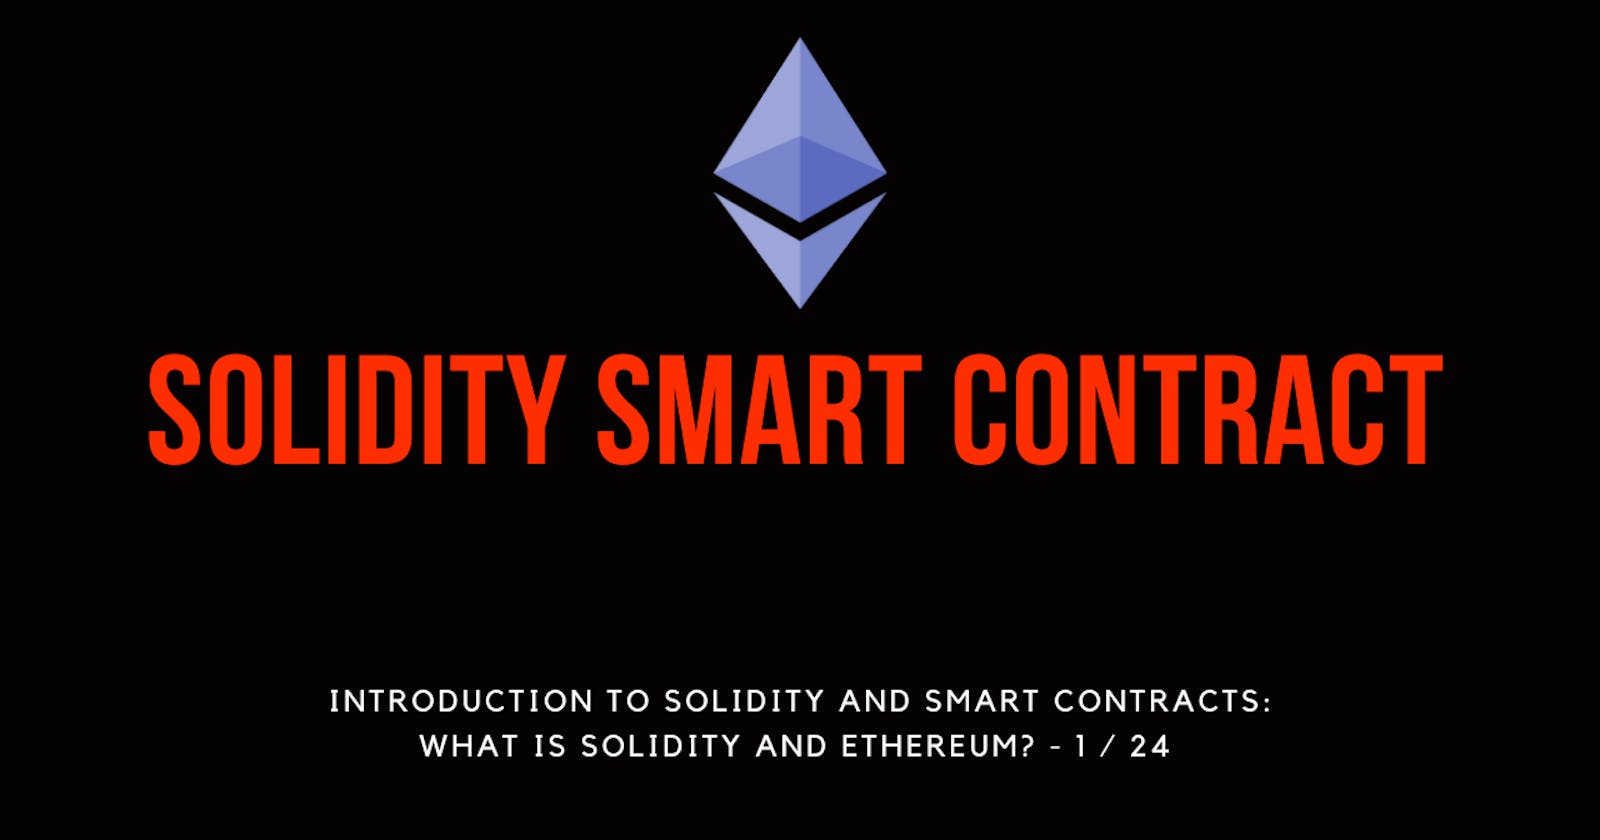 Introduction to Solidity and Smart Contracts: What is Solidity and Ethereum? - 1 / 24